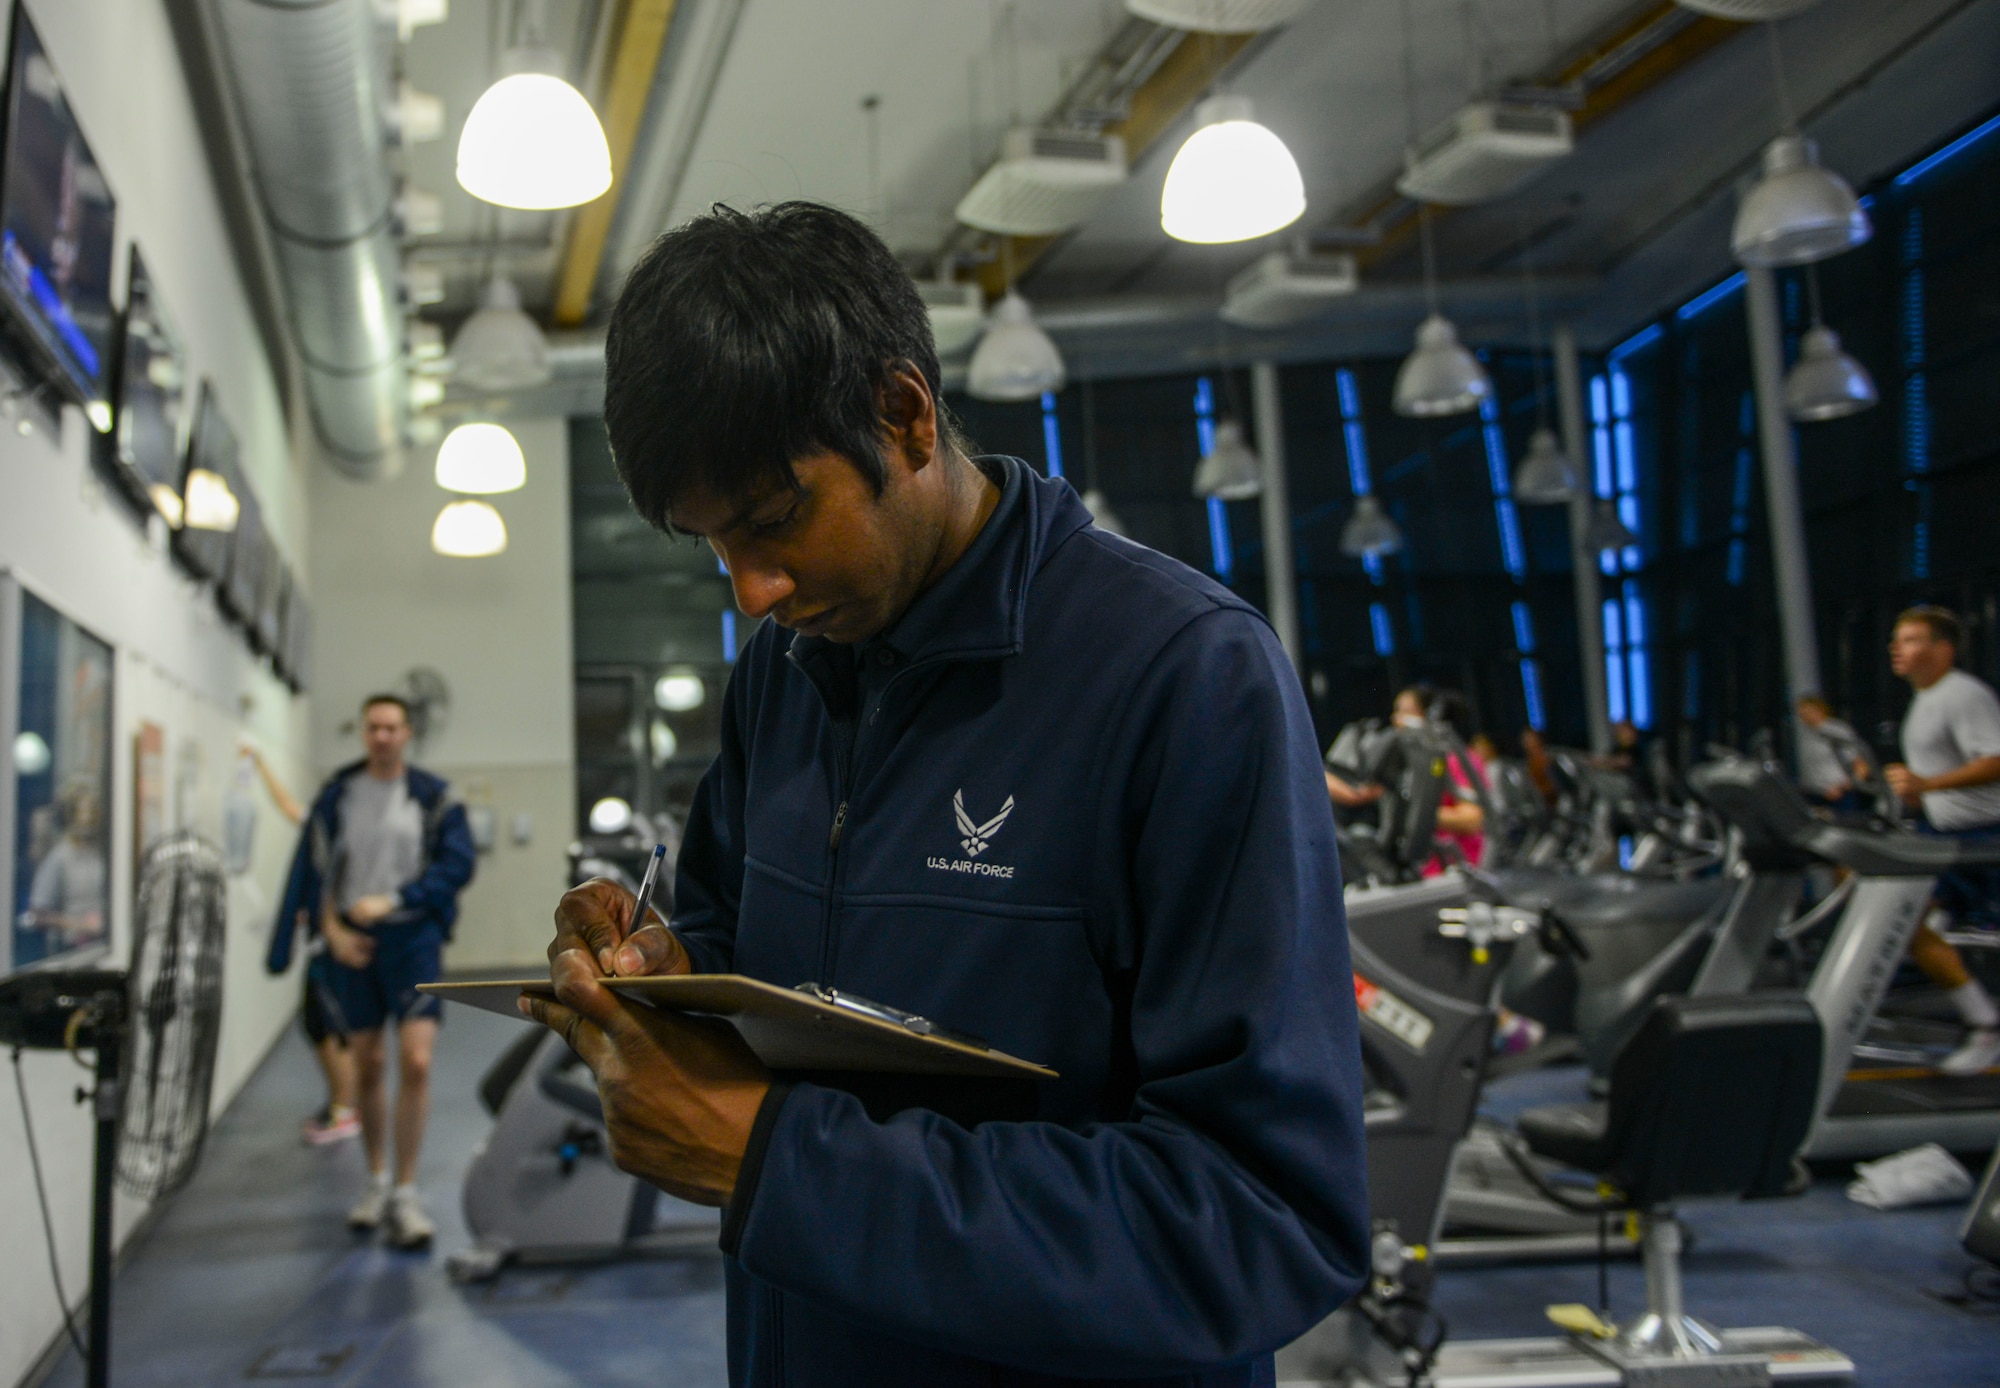 Victor Trey, 786th Force Support Squadron recreation assistant, conducts an hourly facility check at the Southside Fitness Center at Ramstein Air Base, Germany, Oct. 6, 2016. Staff at the SSFC are responsible for ensuring the facility is safe, secure and in proper operational condition. (U.S. Air Force photo by Airman 1st Class Joshua Magbanua)